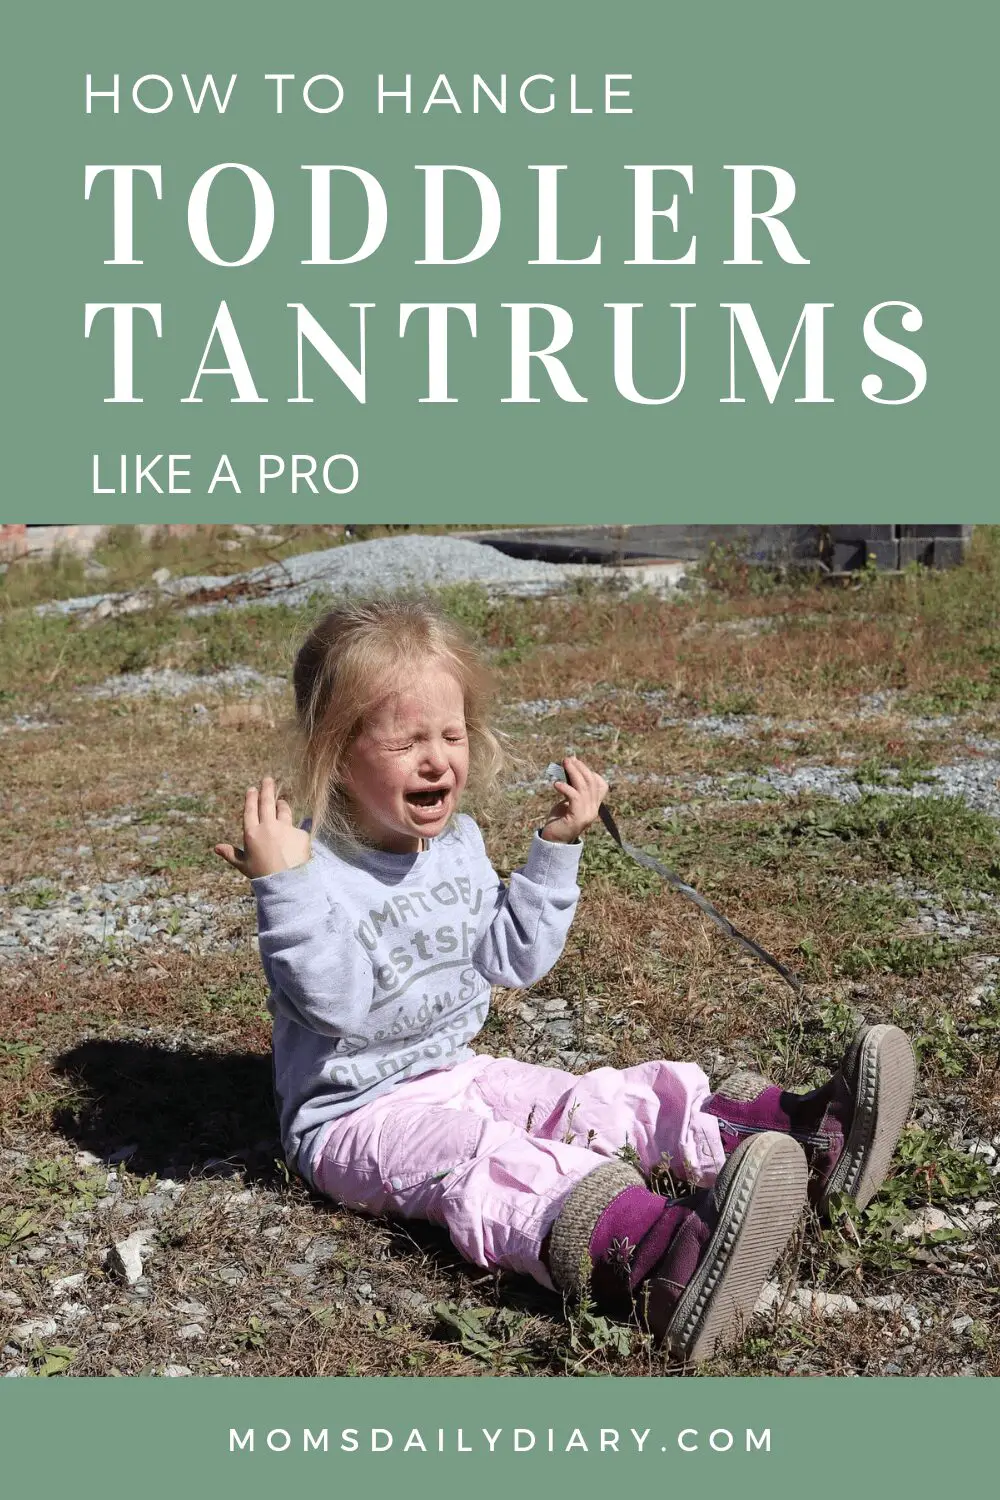 Do you know how to handle toddle tantrums like a pro? Let me tell you now!